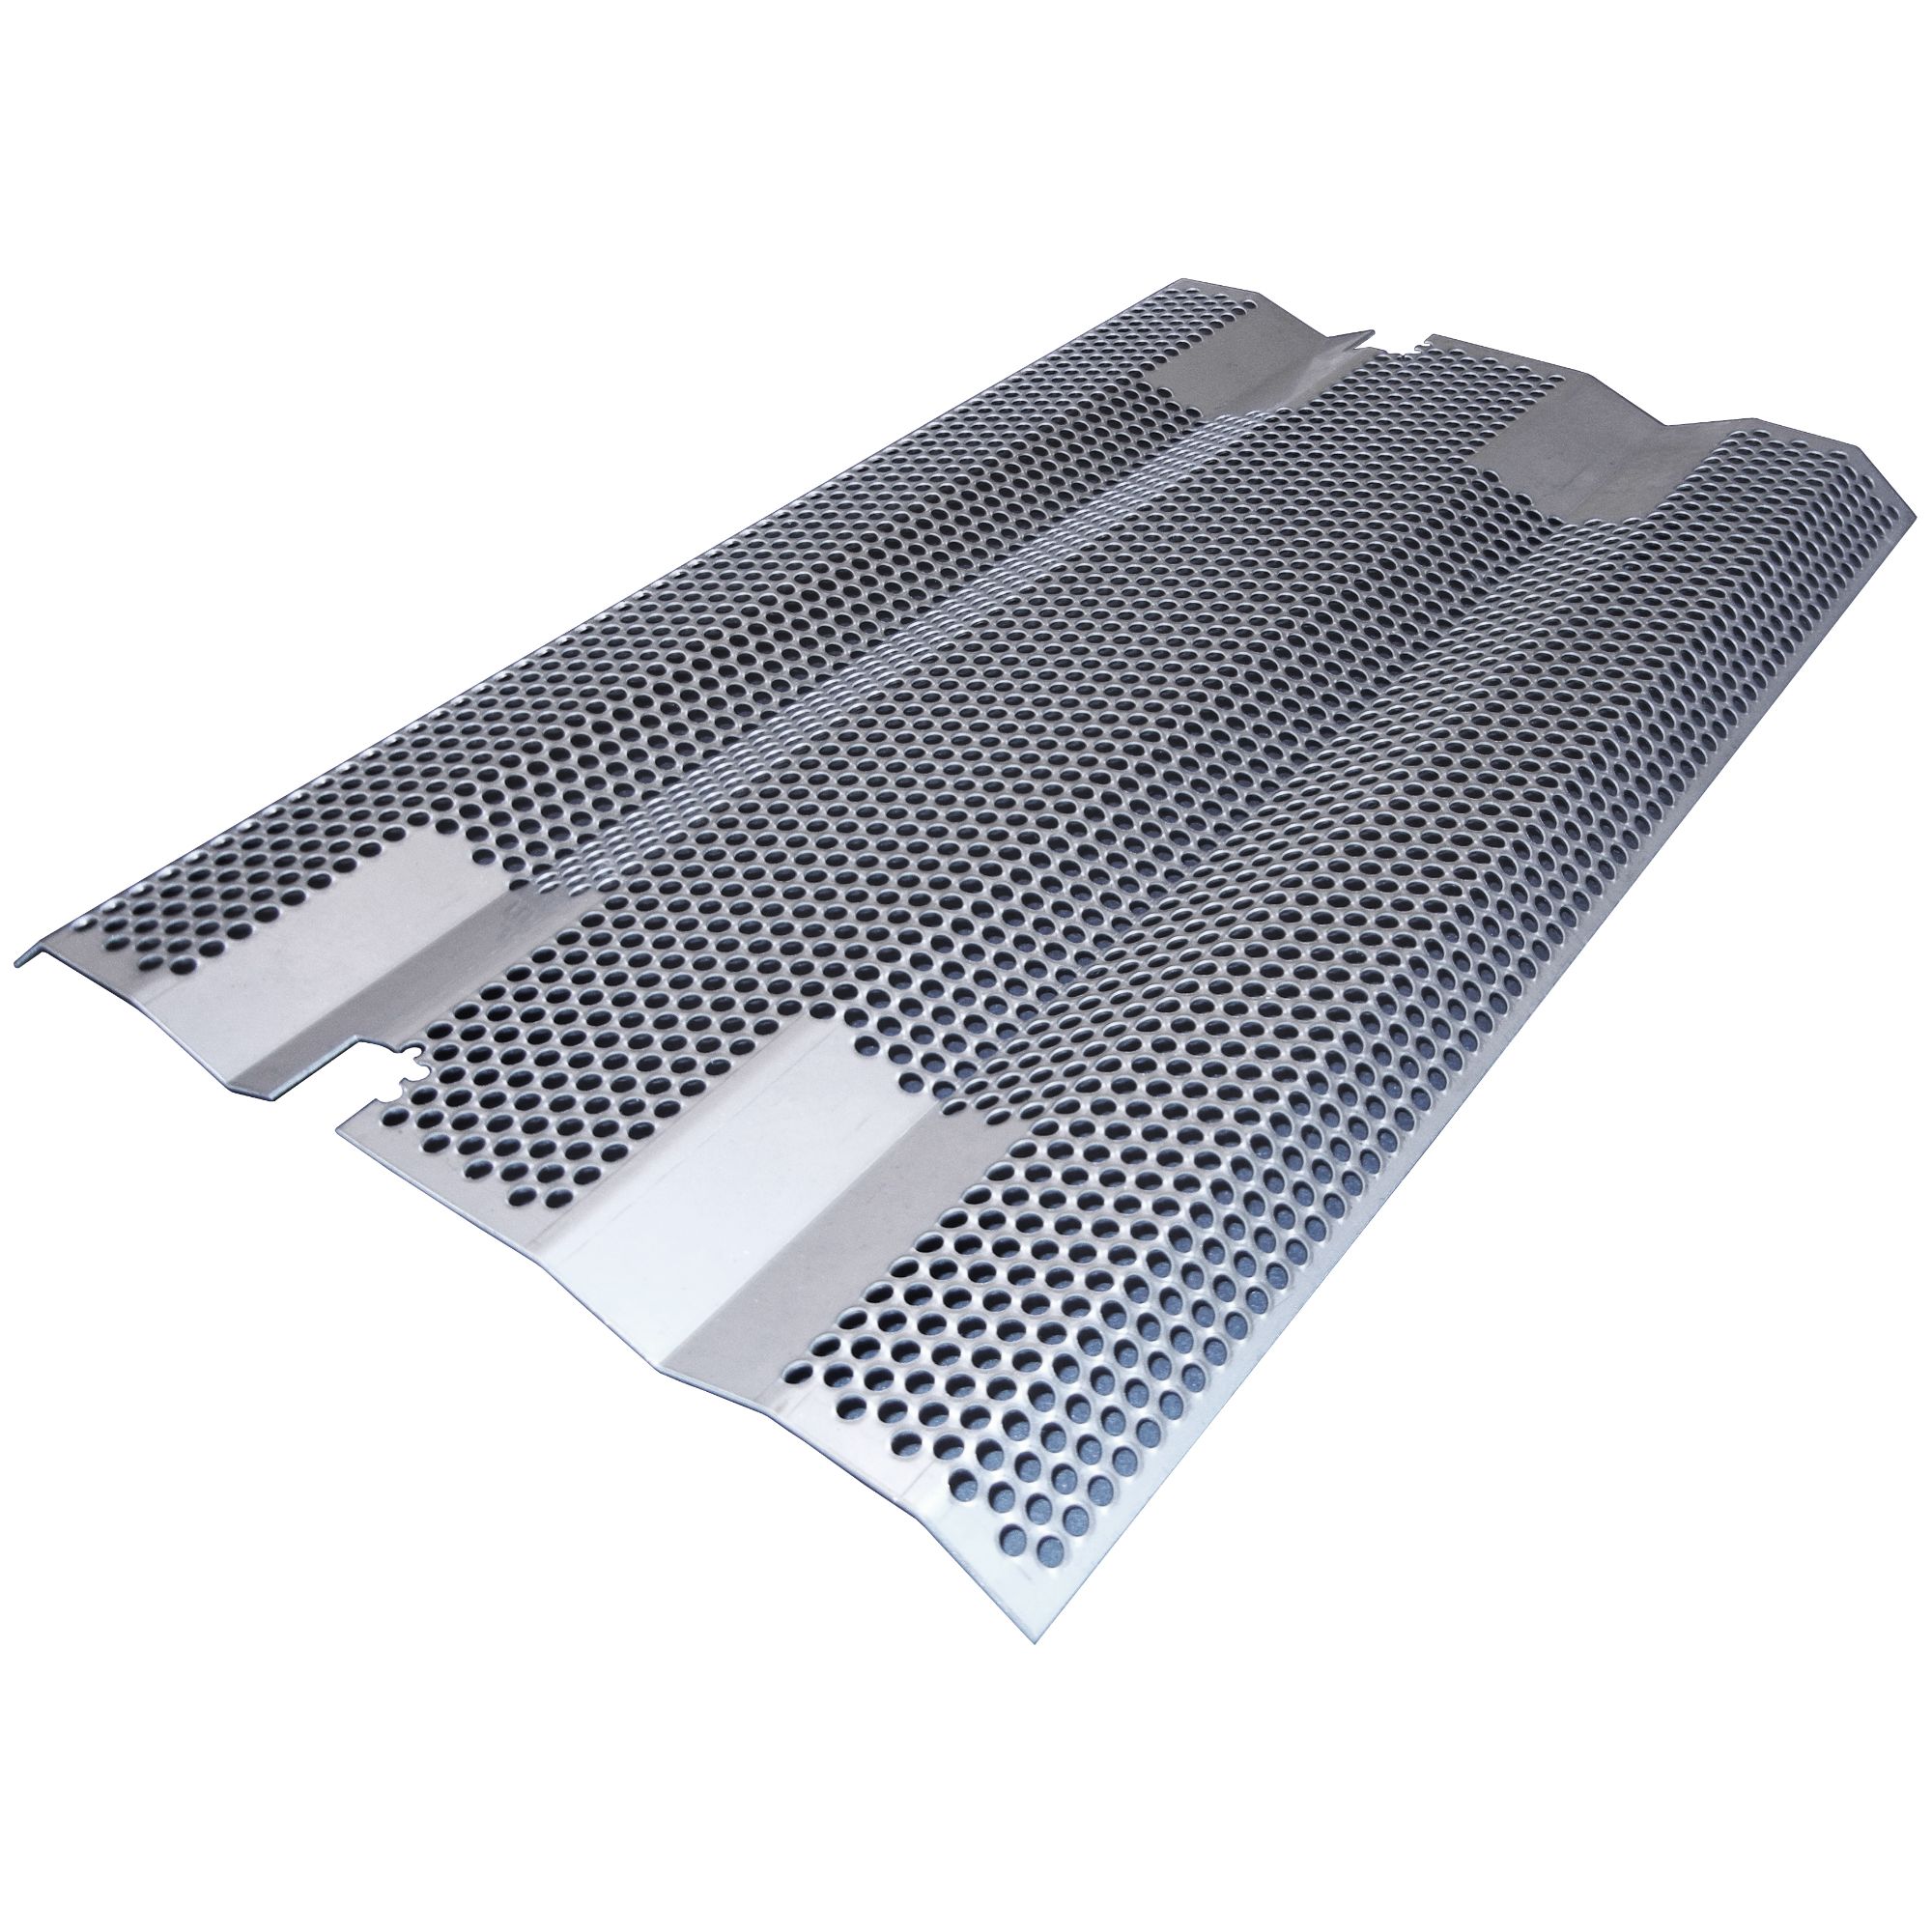 Stainless steel heat plate for Fire Magic brand gas grills